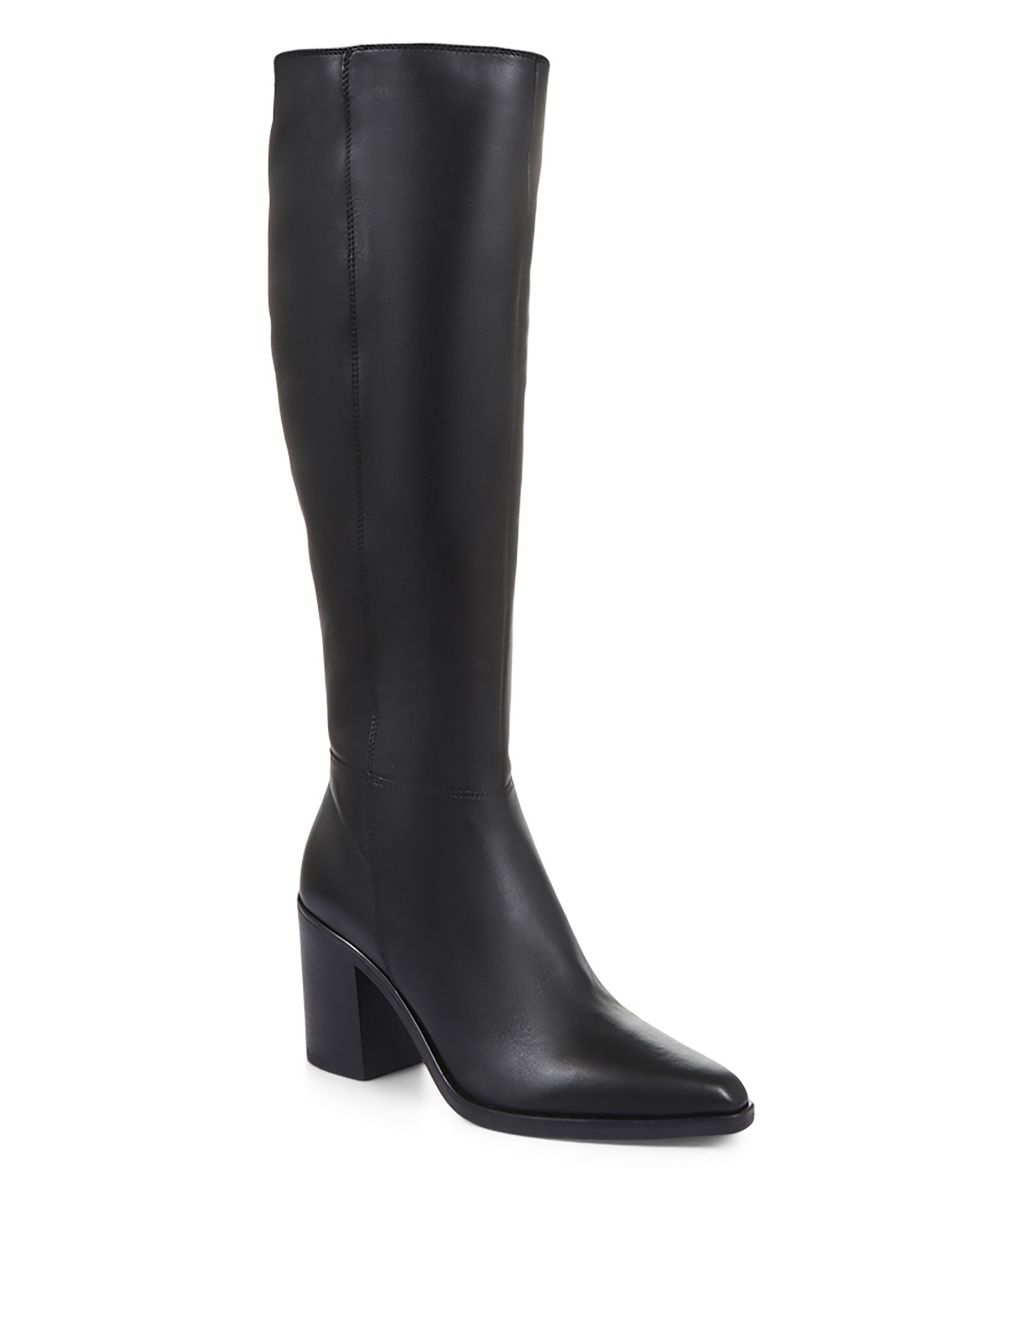 Slim Calf Leather Block Heel Pointed Knee High Boots 1 of 7